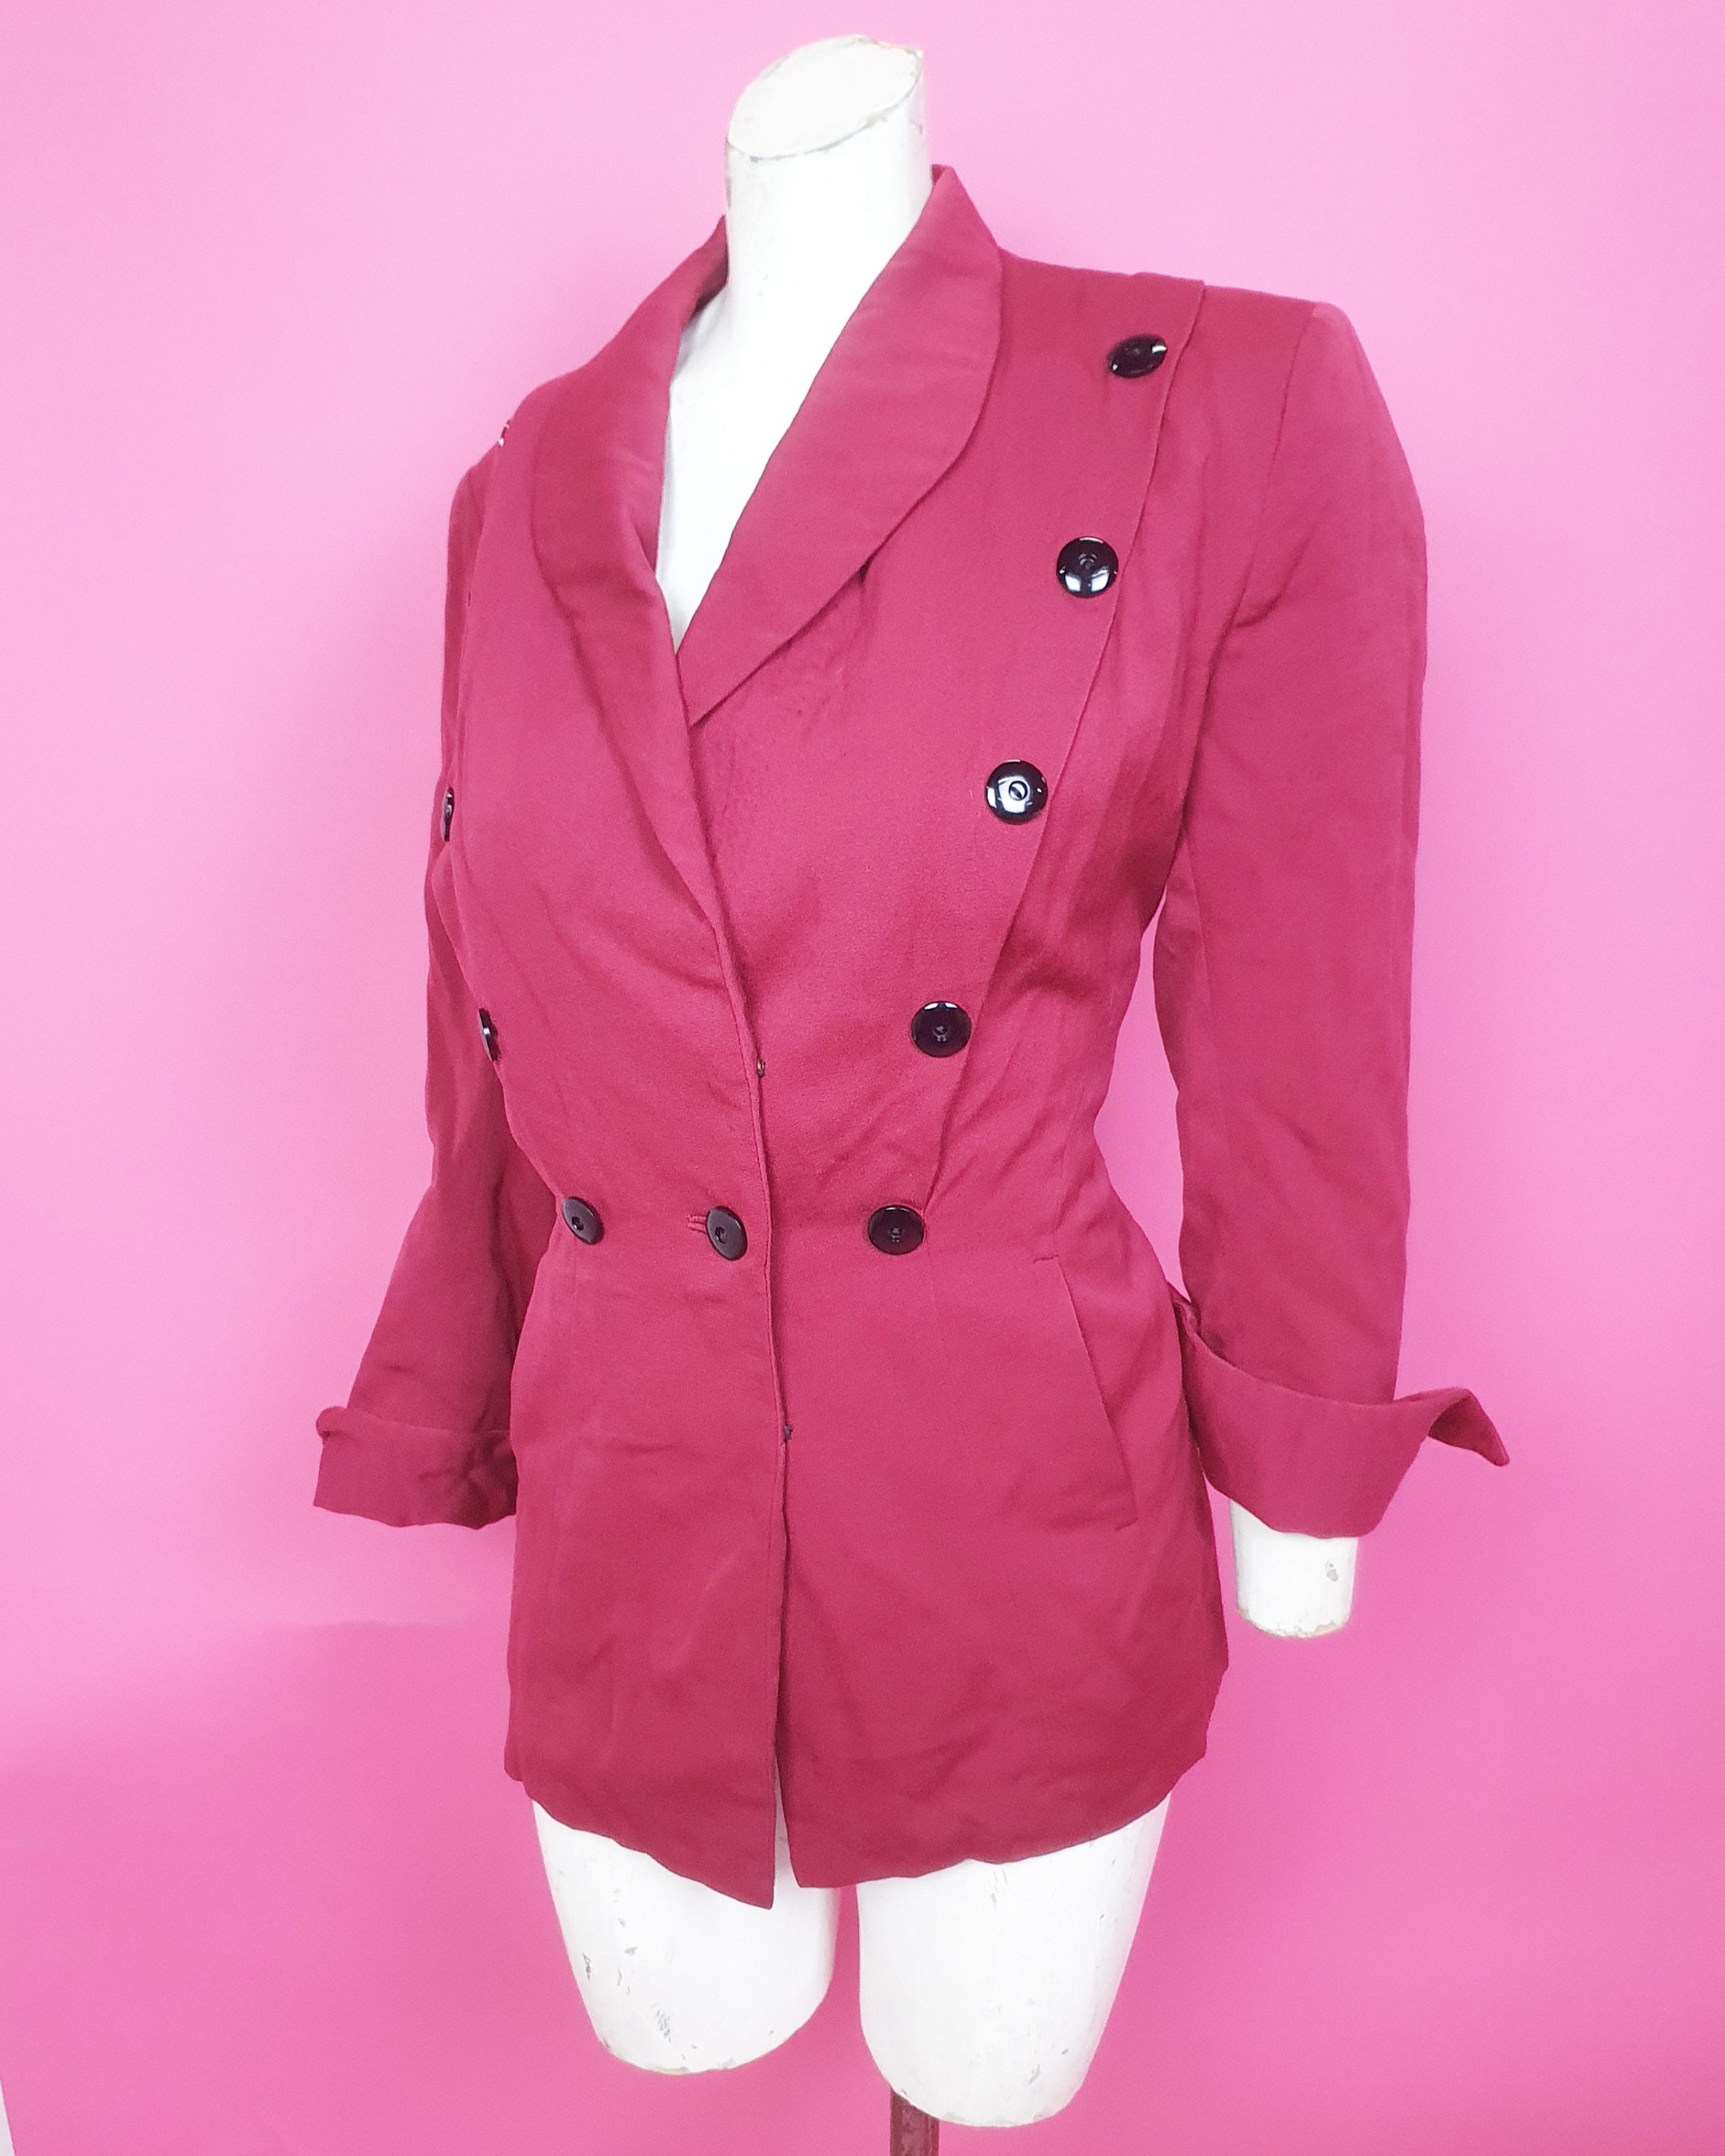 Real Vintage Search Engine Amazing 1940S Burgundy Jacket With Fab Black Button Details Such Stylish Tailoring Wartime Classic Timeless $145.62 AT vintagedancer.com